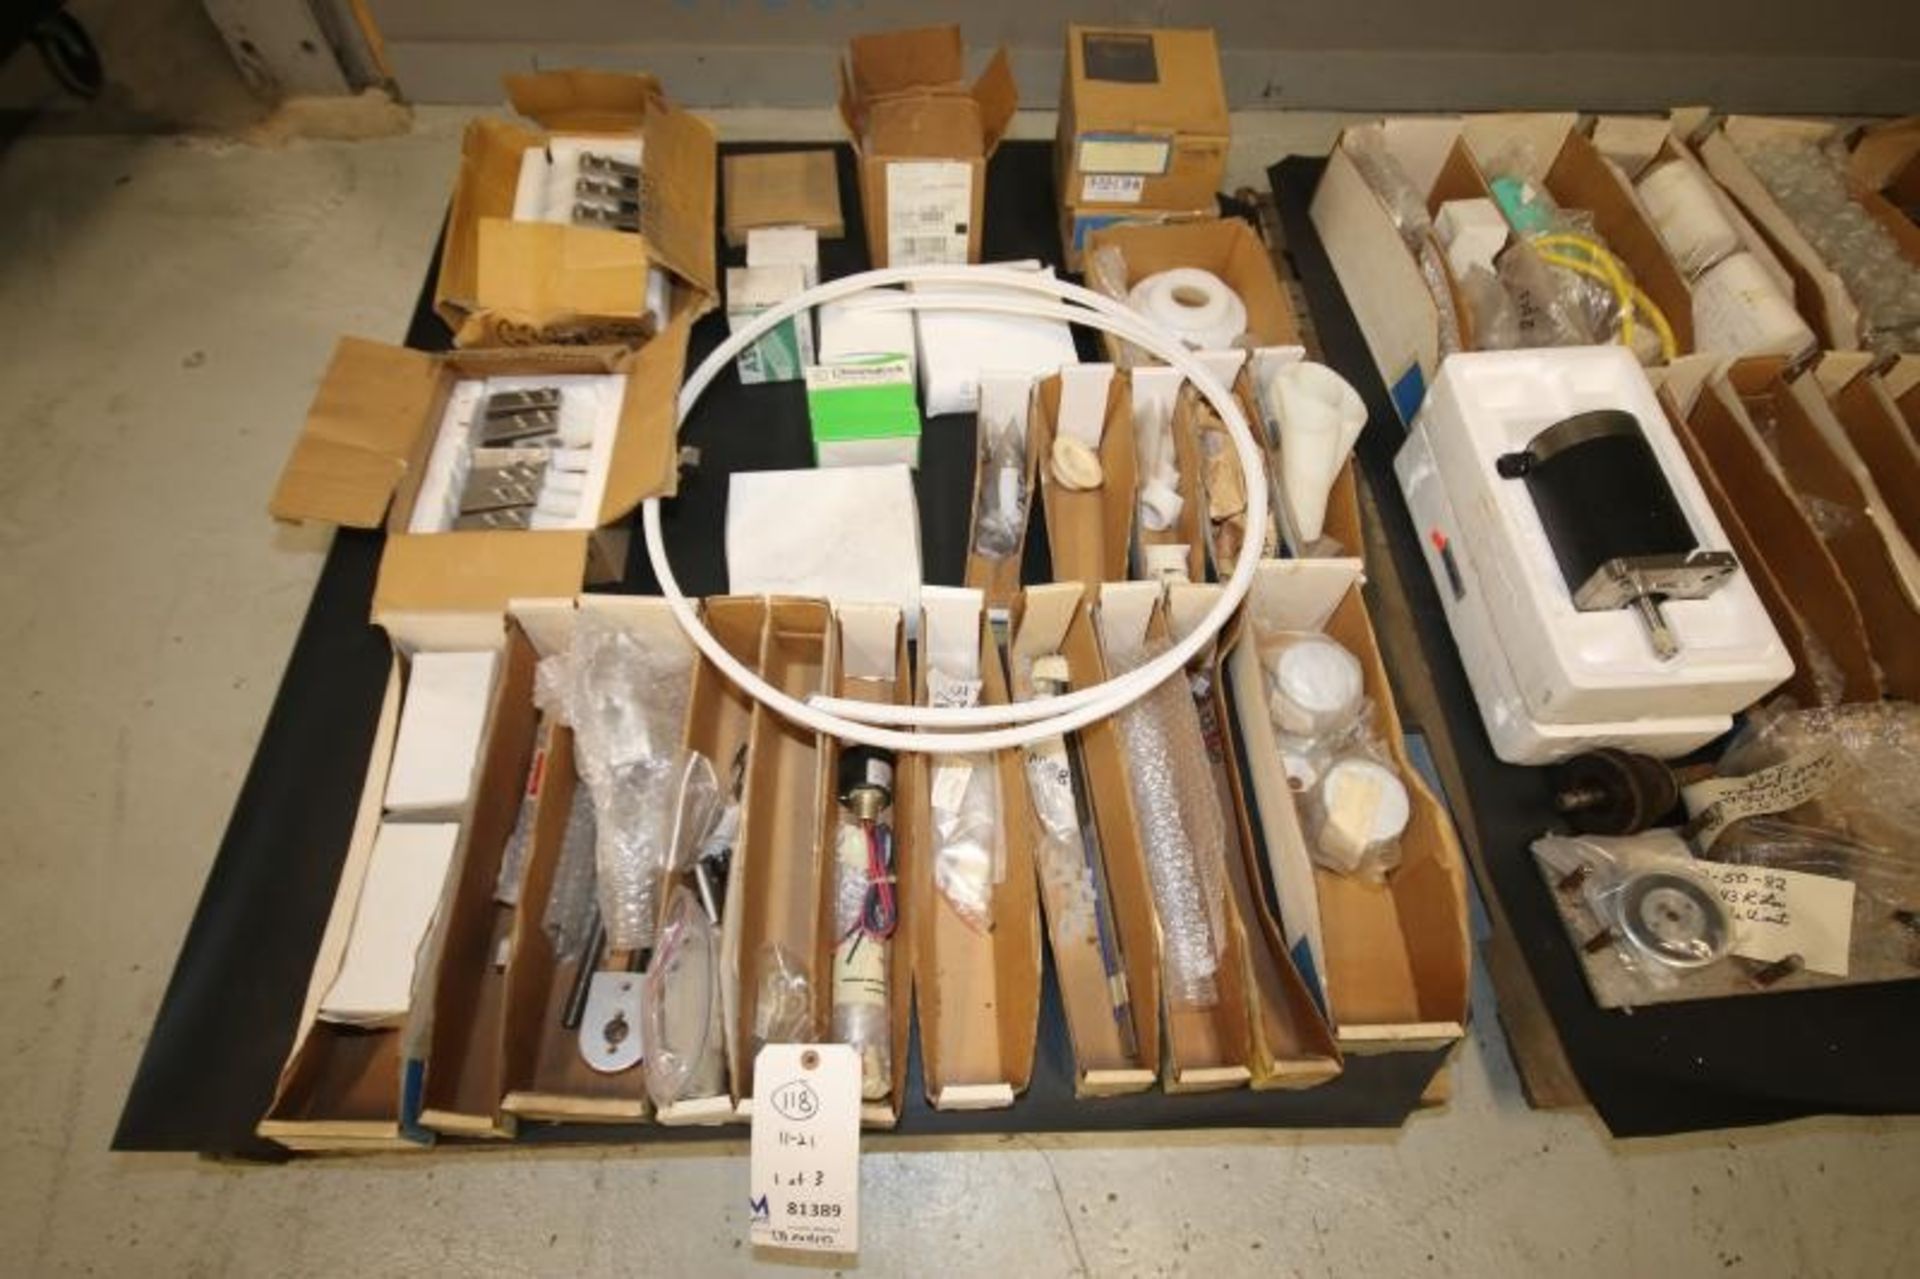 Lot of Assorted Spare Parts for Rheon & Other(INV#81389)(Located @ the MDG Auction Showroom in Pgh., - Image 2 of 4